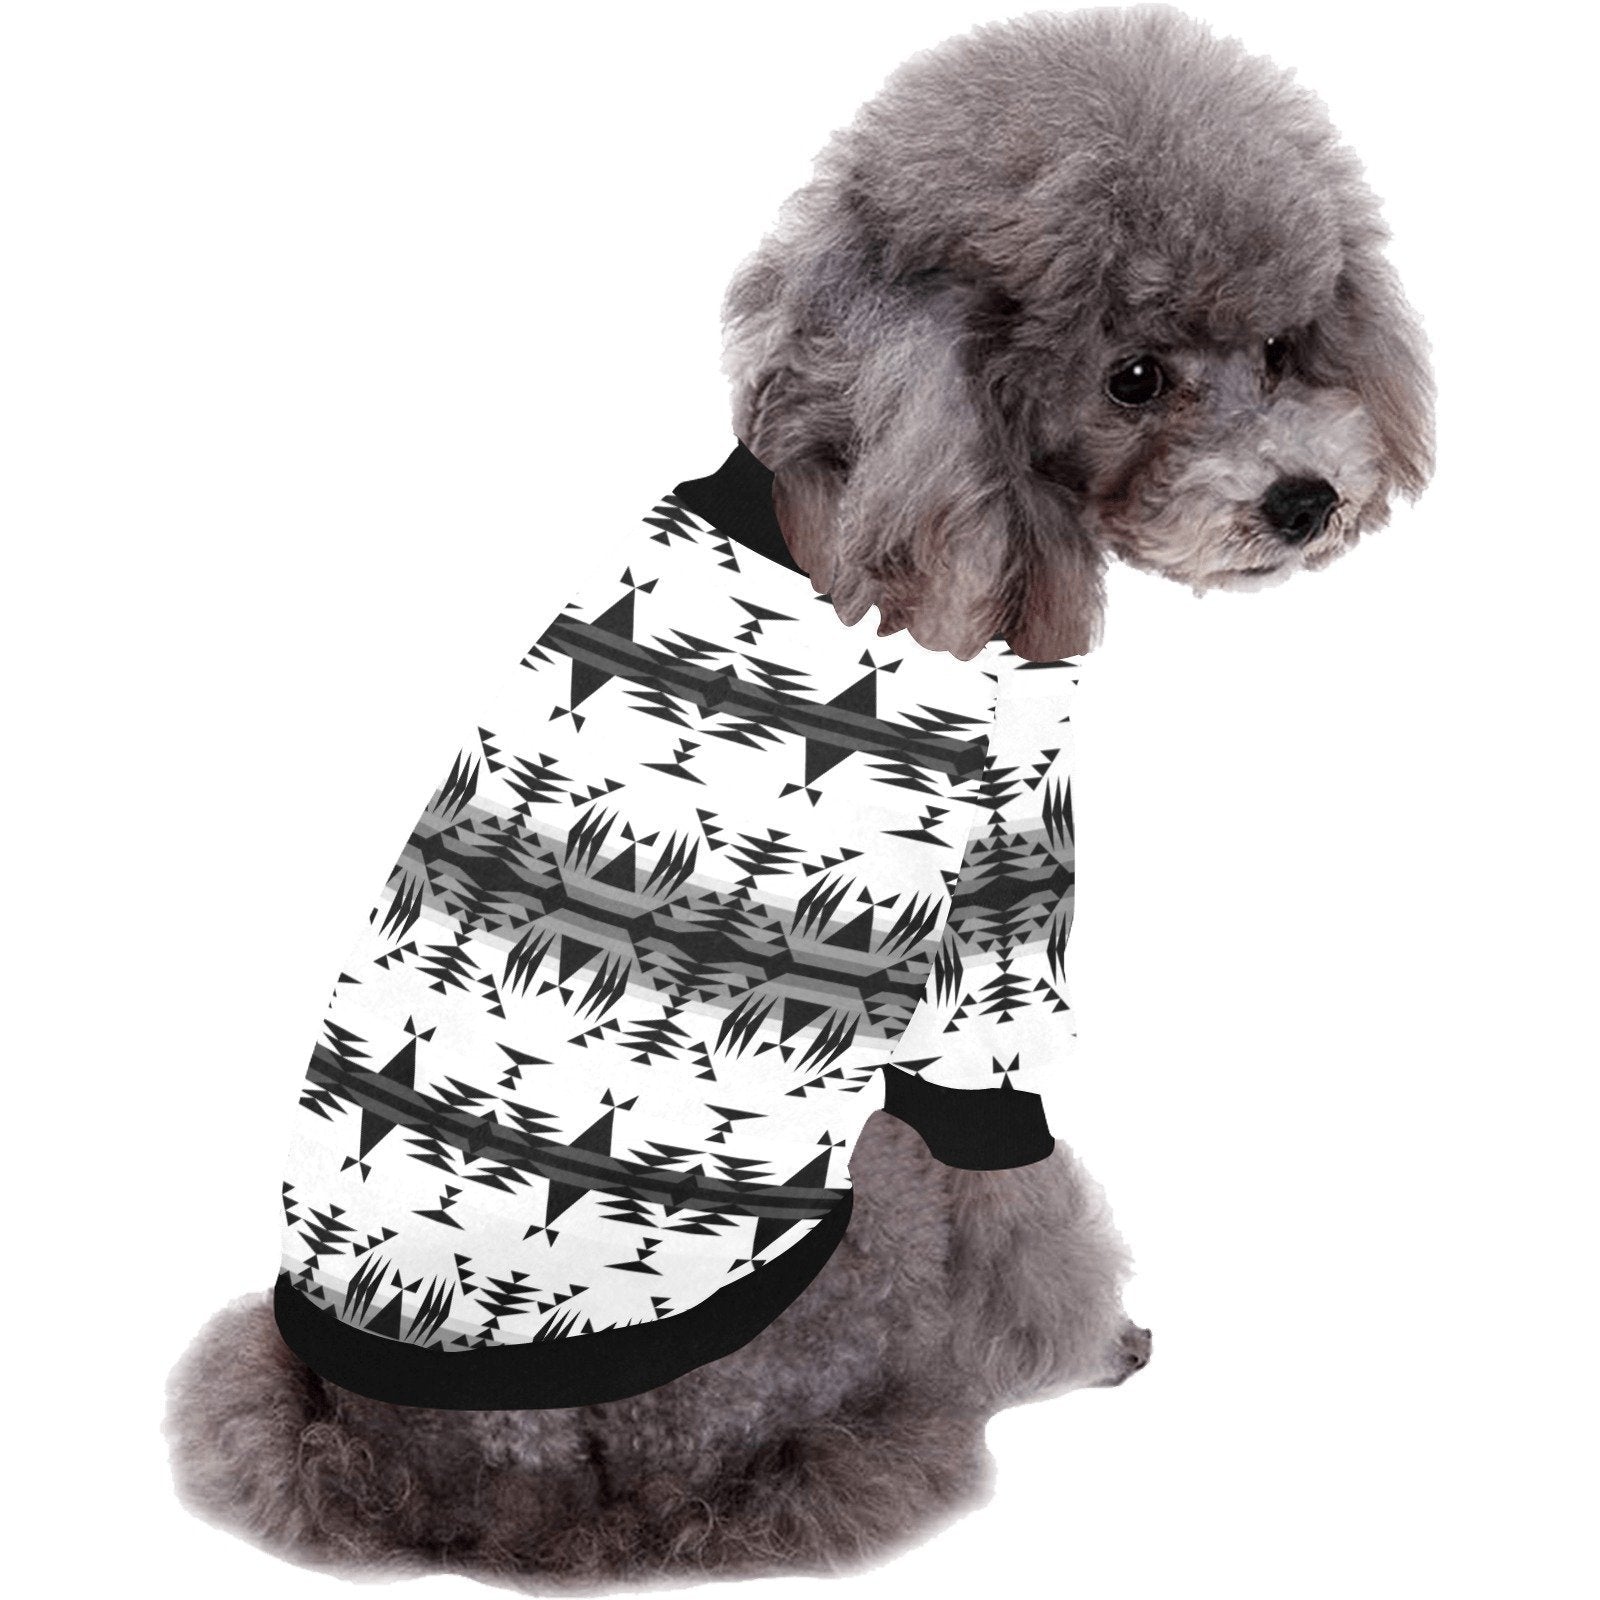 Between the Mountains White and Black Pet Dog Round Neck Shirt Pet Dog Round Neck Shirt e-joyer 